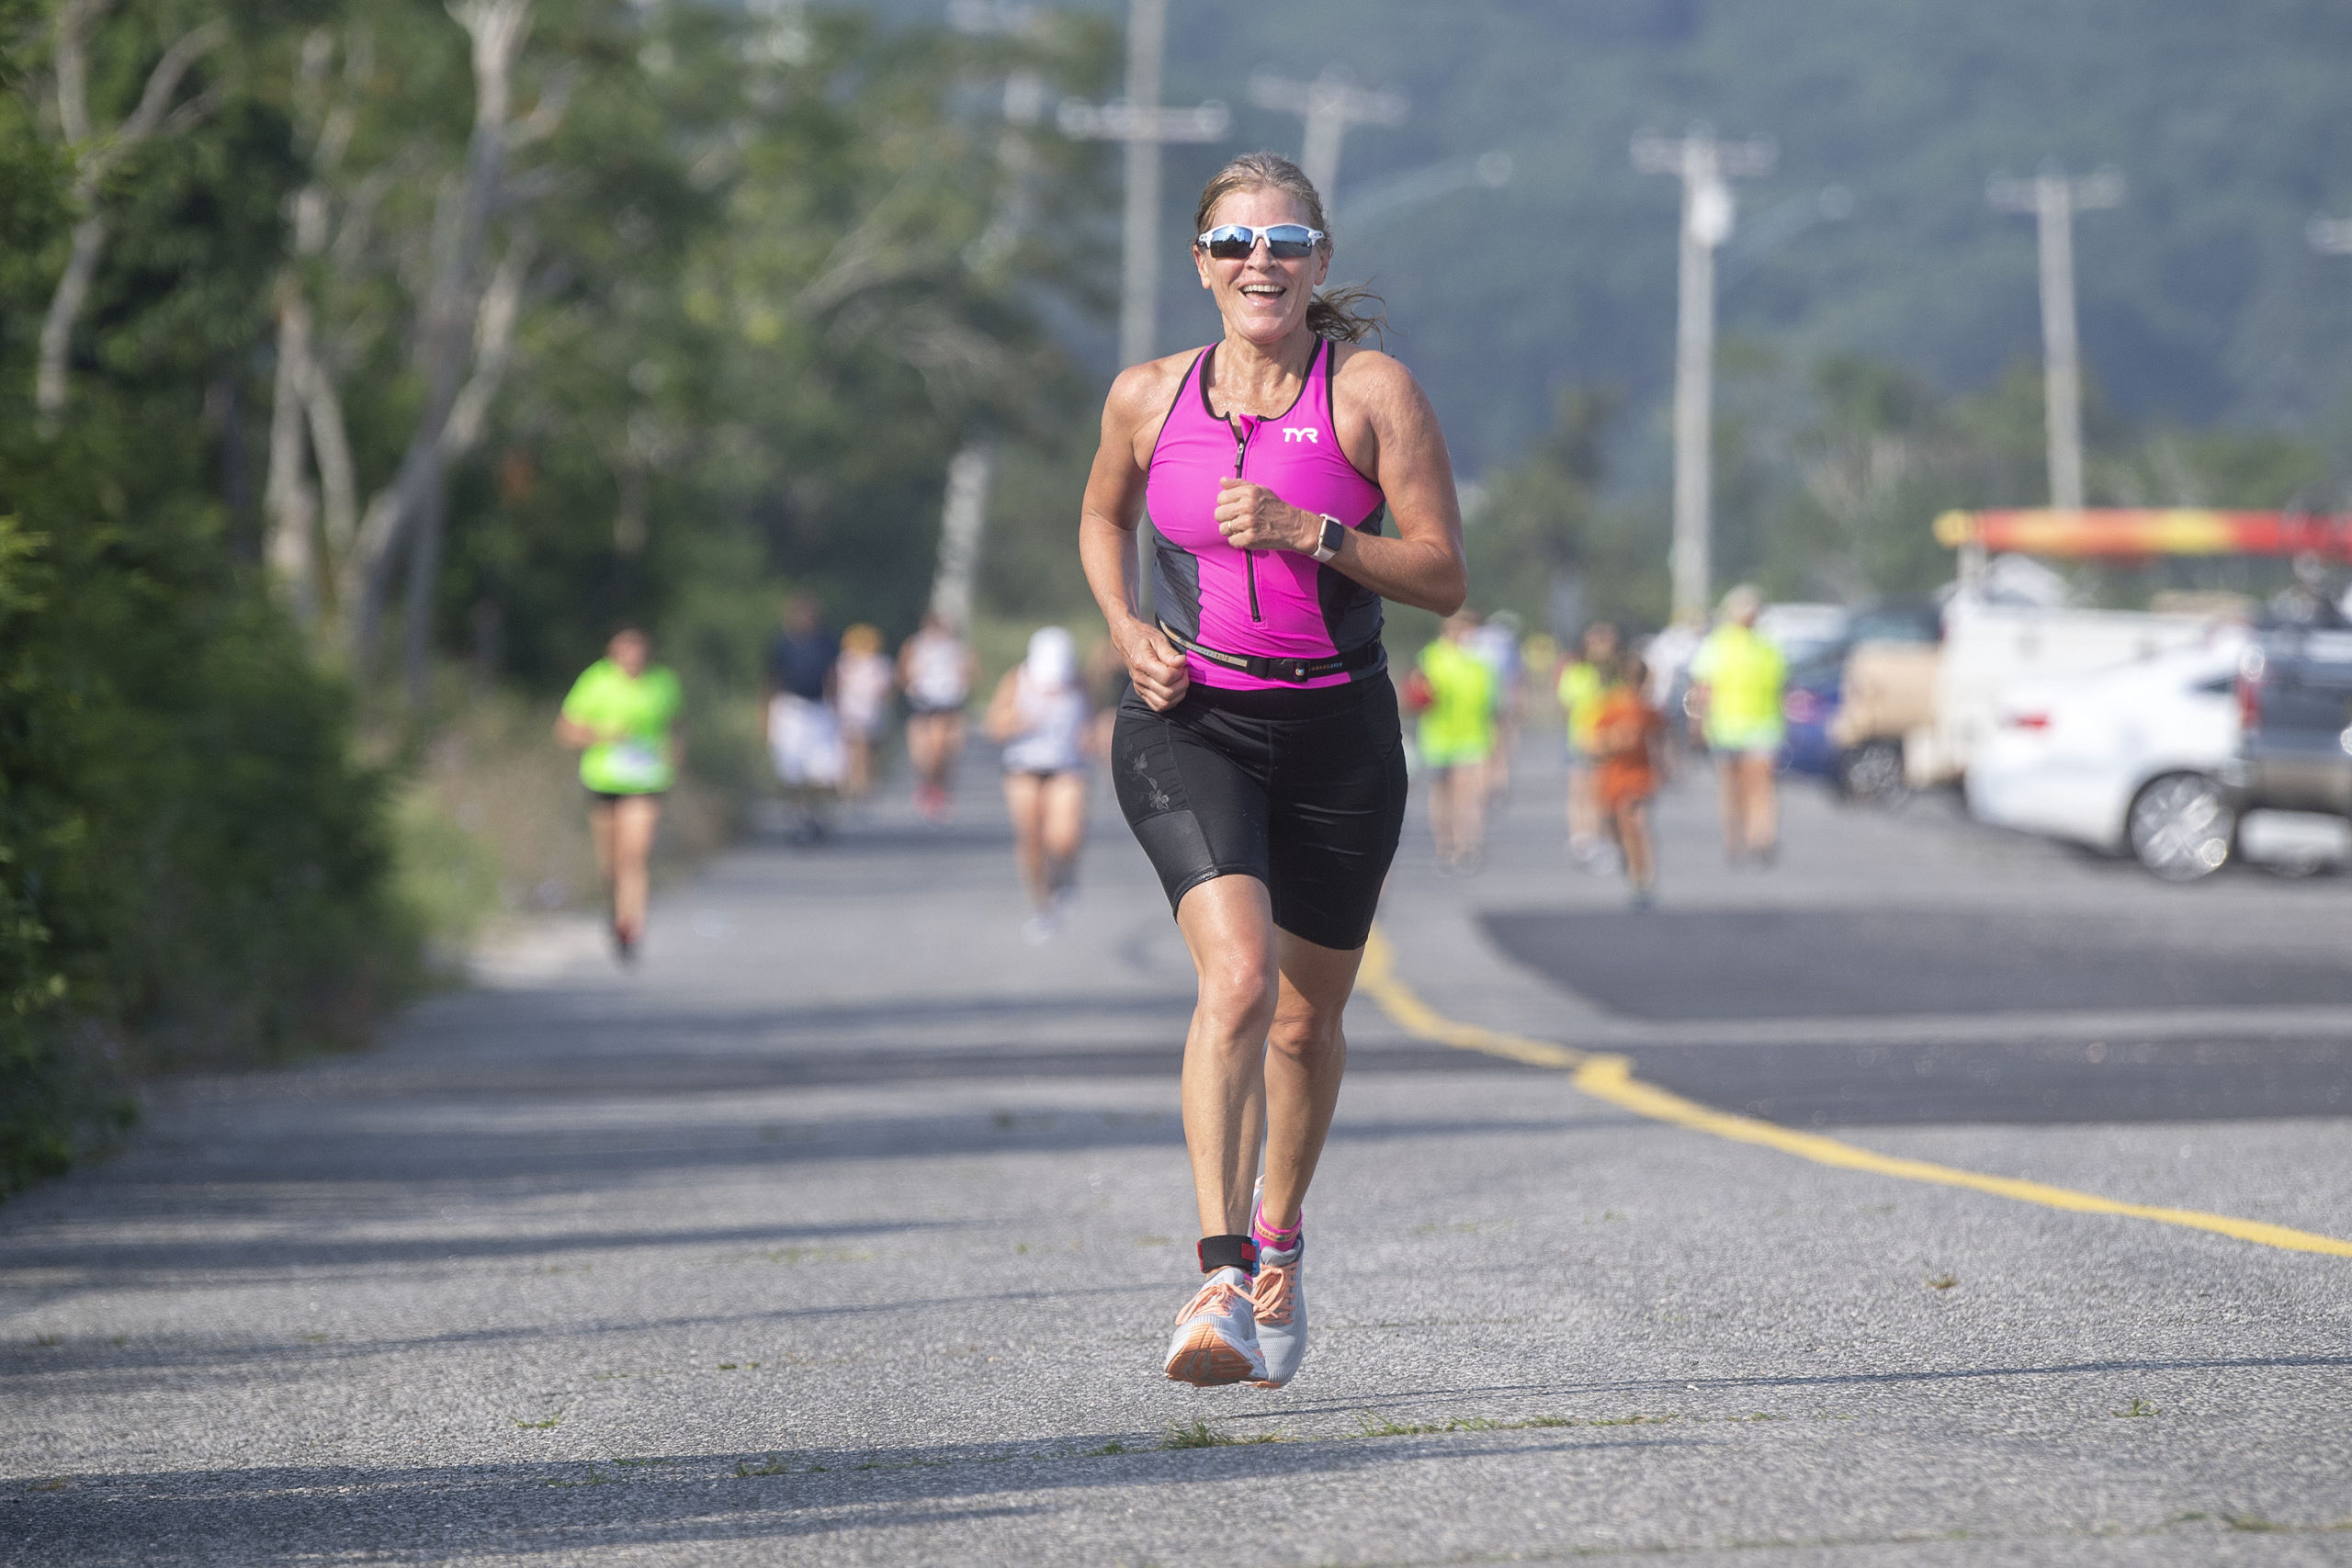 Kim Covell, assistant editor for the Express News Group, competes in the 1.5 mile run leg of the Hamptons Young at Heart Triathlon, held at Long Beach in Sag Harbor this past Saturday, July 17.